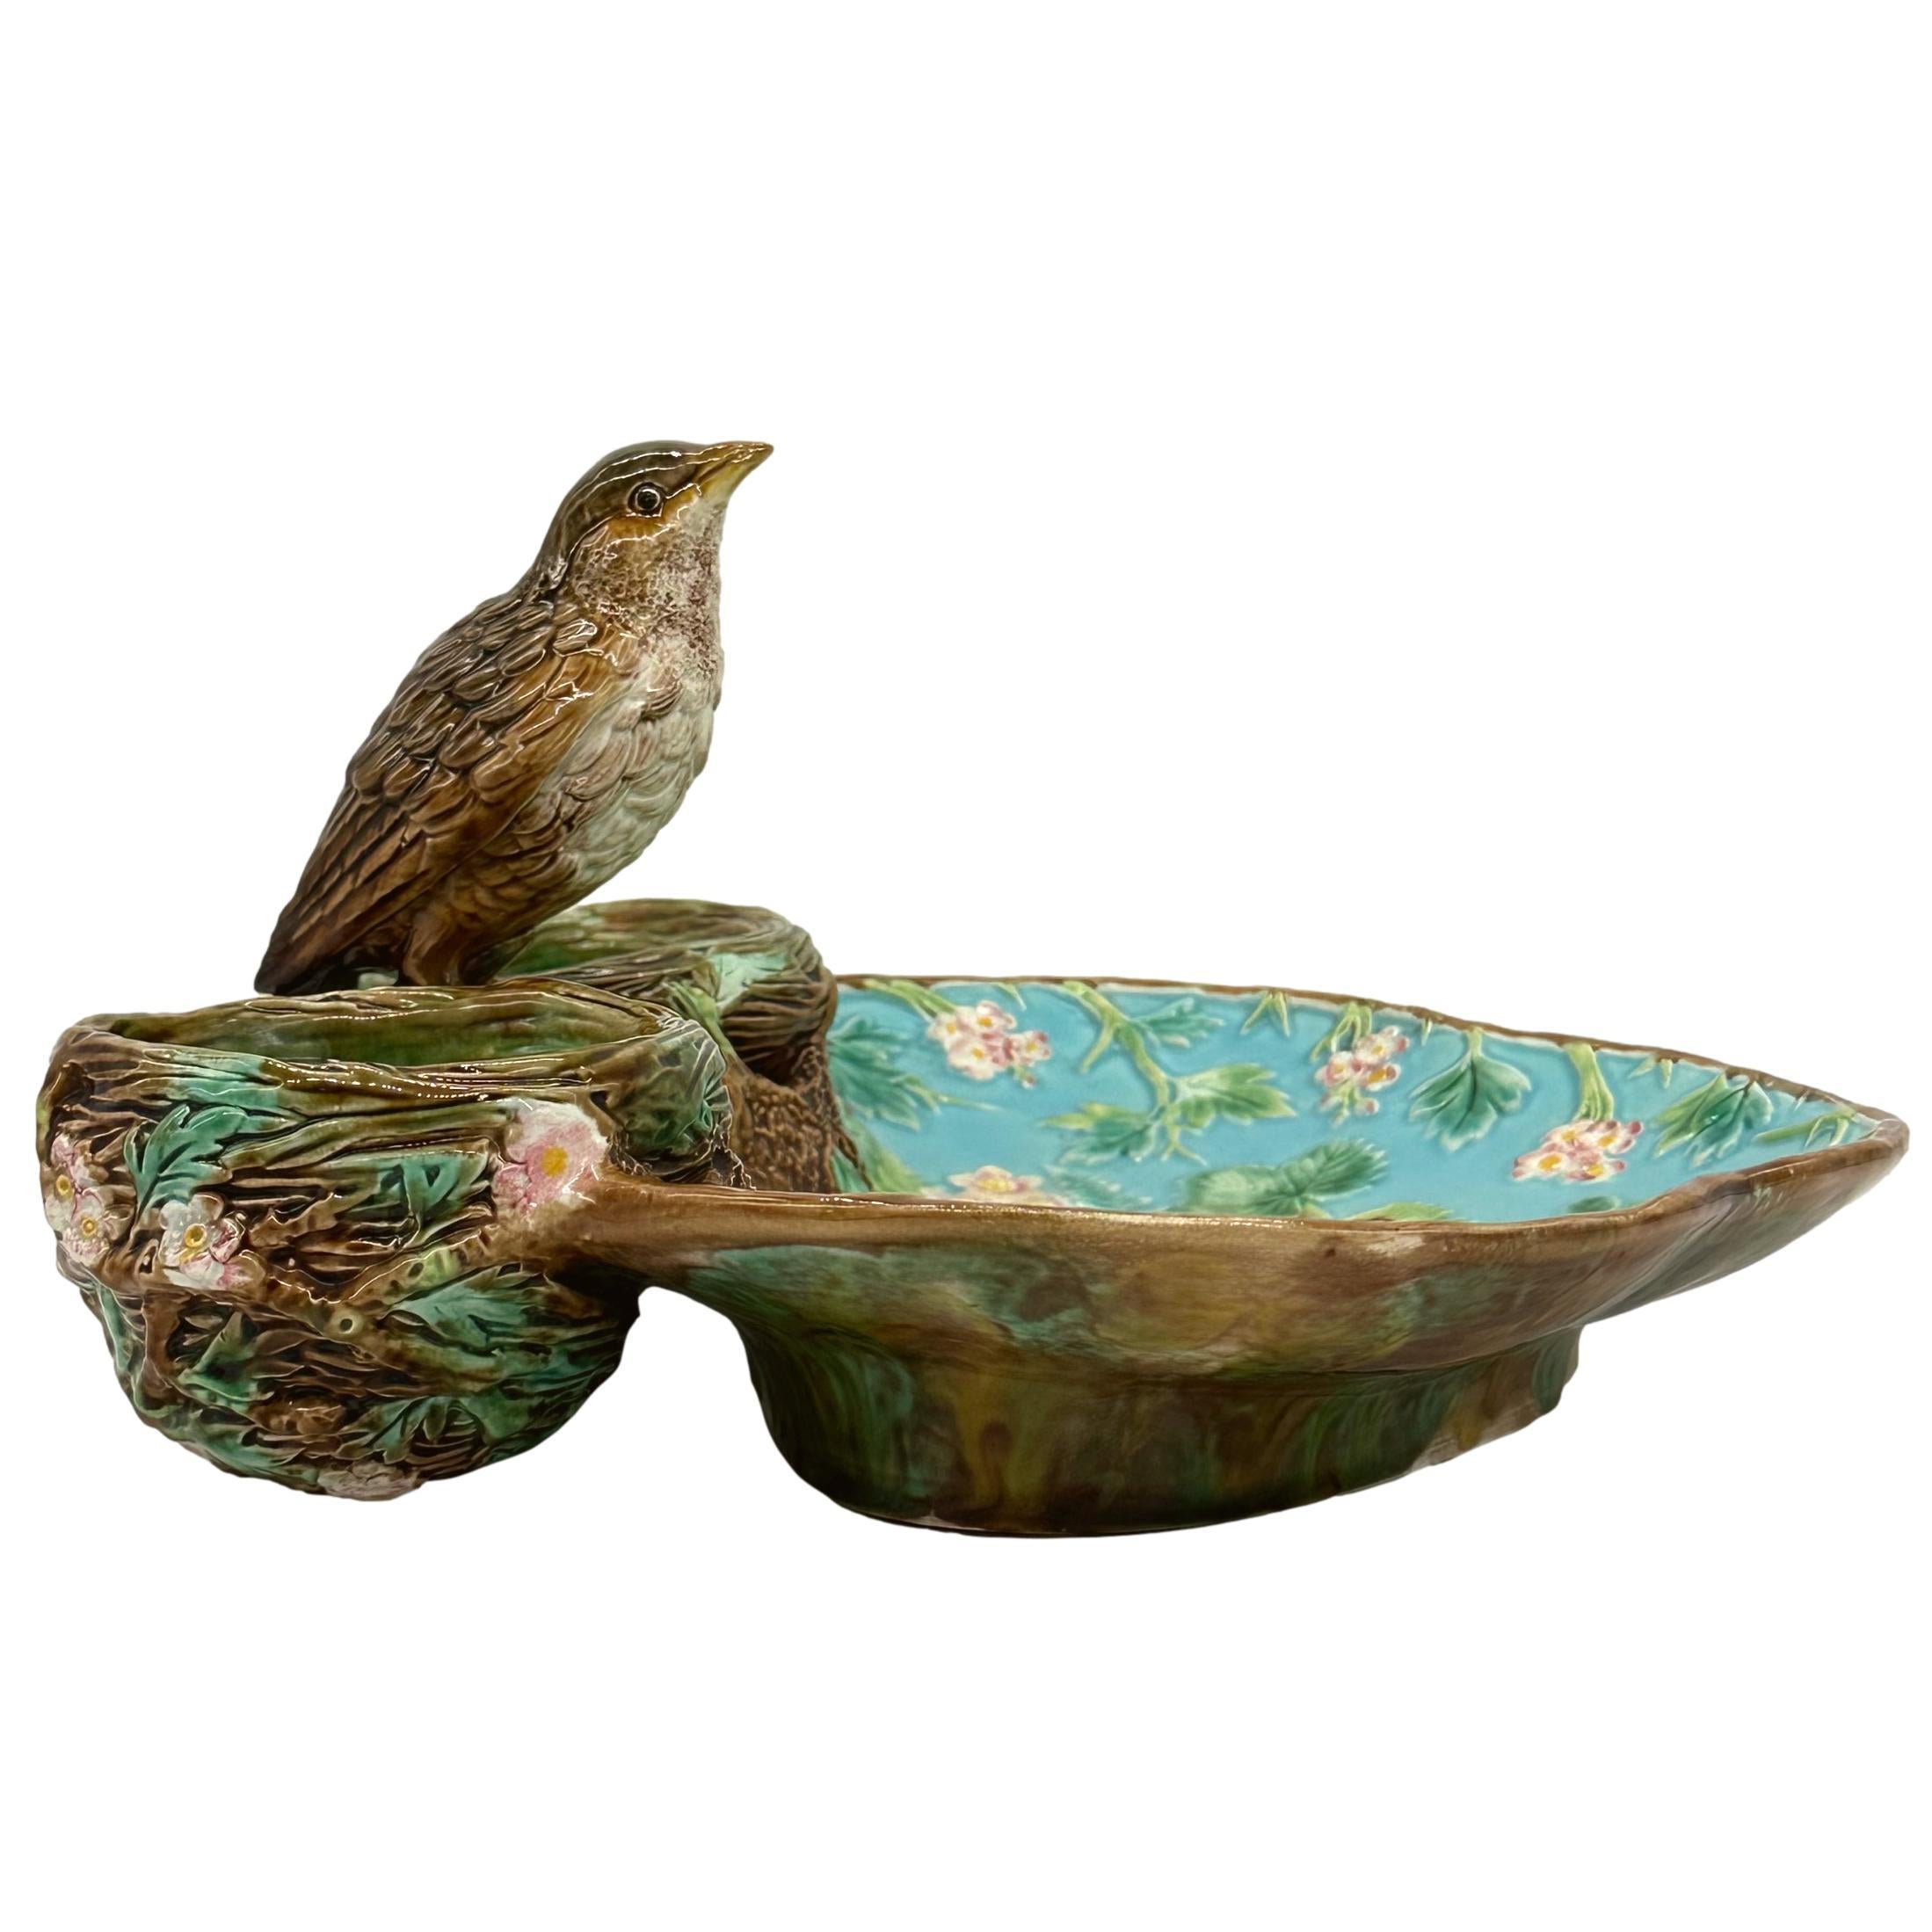 Molded George Jones Majolica Strawberry Server Mounted by a Bird, English, circa 1870 For Sale